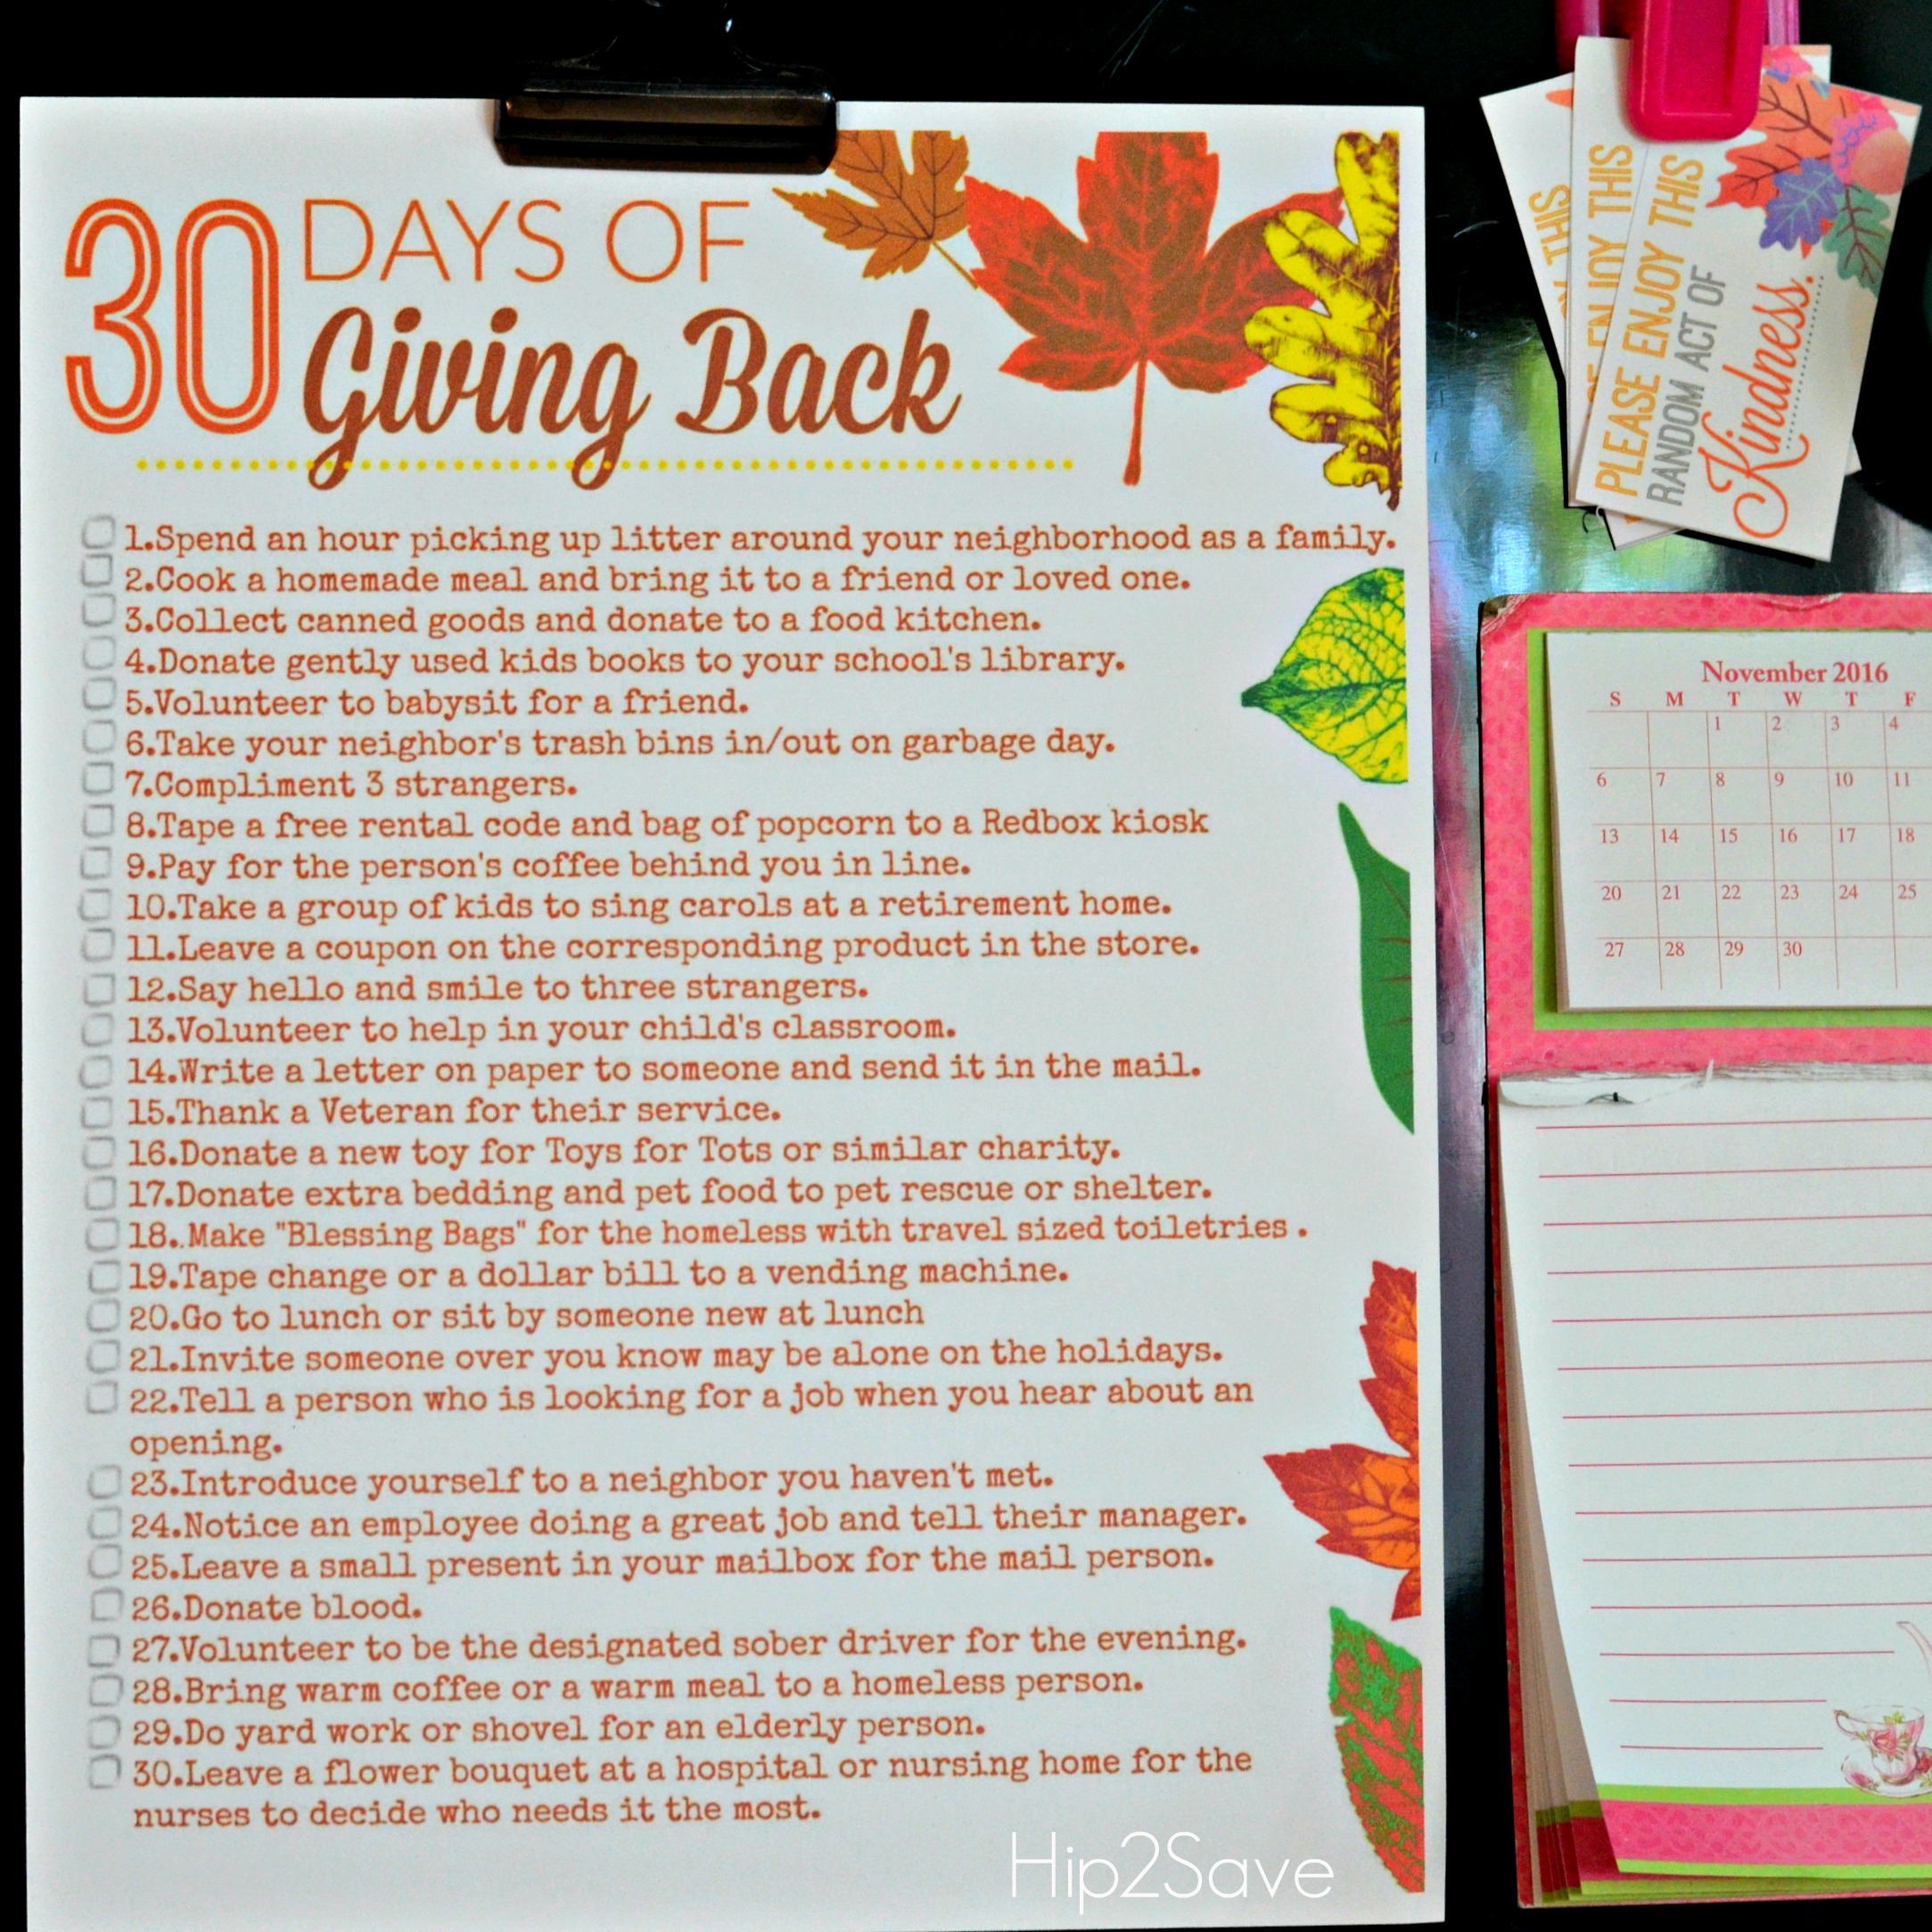 fb-photo-30-days-of-giving-back